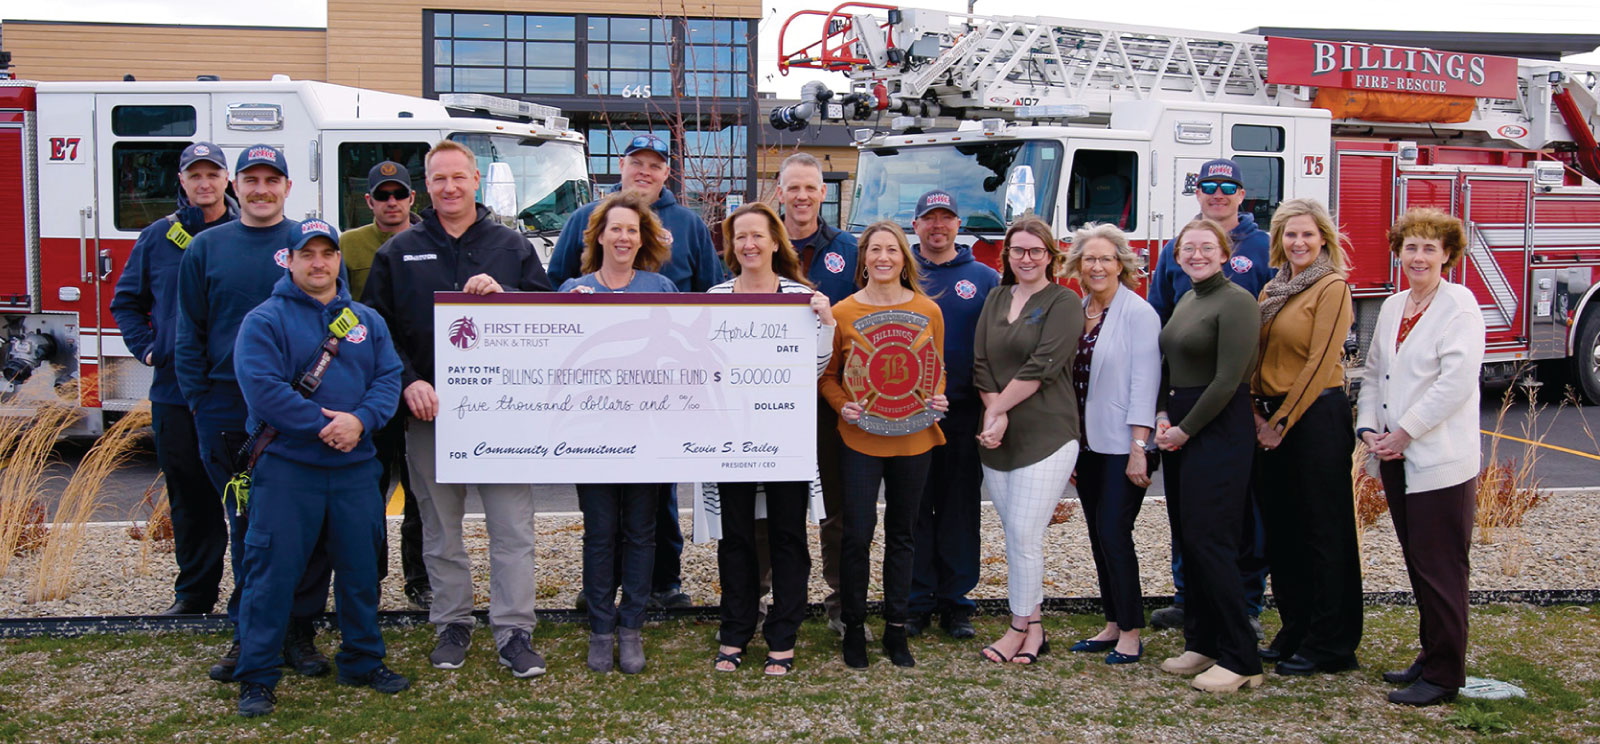 Group of First Federal employees and members of the Billings Firefighters Benevolent Fund holding a $5,000 donation check.